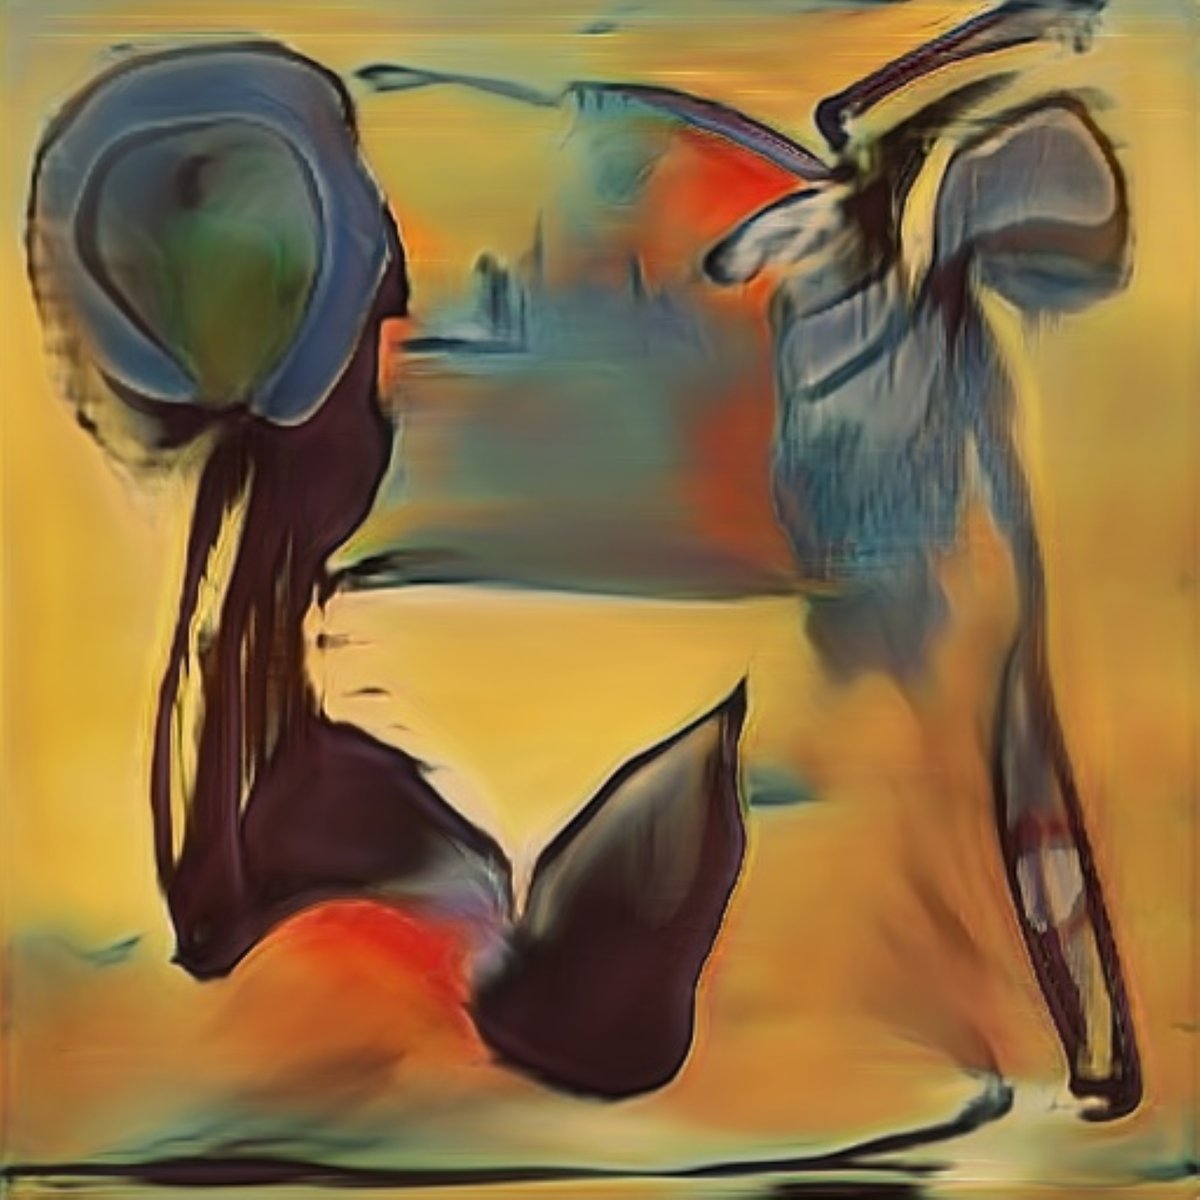 Beach Vista
From my 'Surreal Shapes' collection.
See them all on Foundation:
foundation.app/@rickcrites?ta…

#SurrealArt #AbstractArt #ImpressionistArt #NFTArt